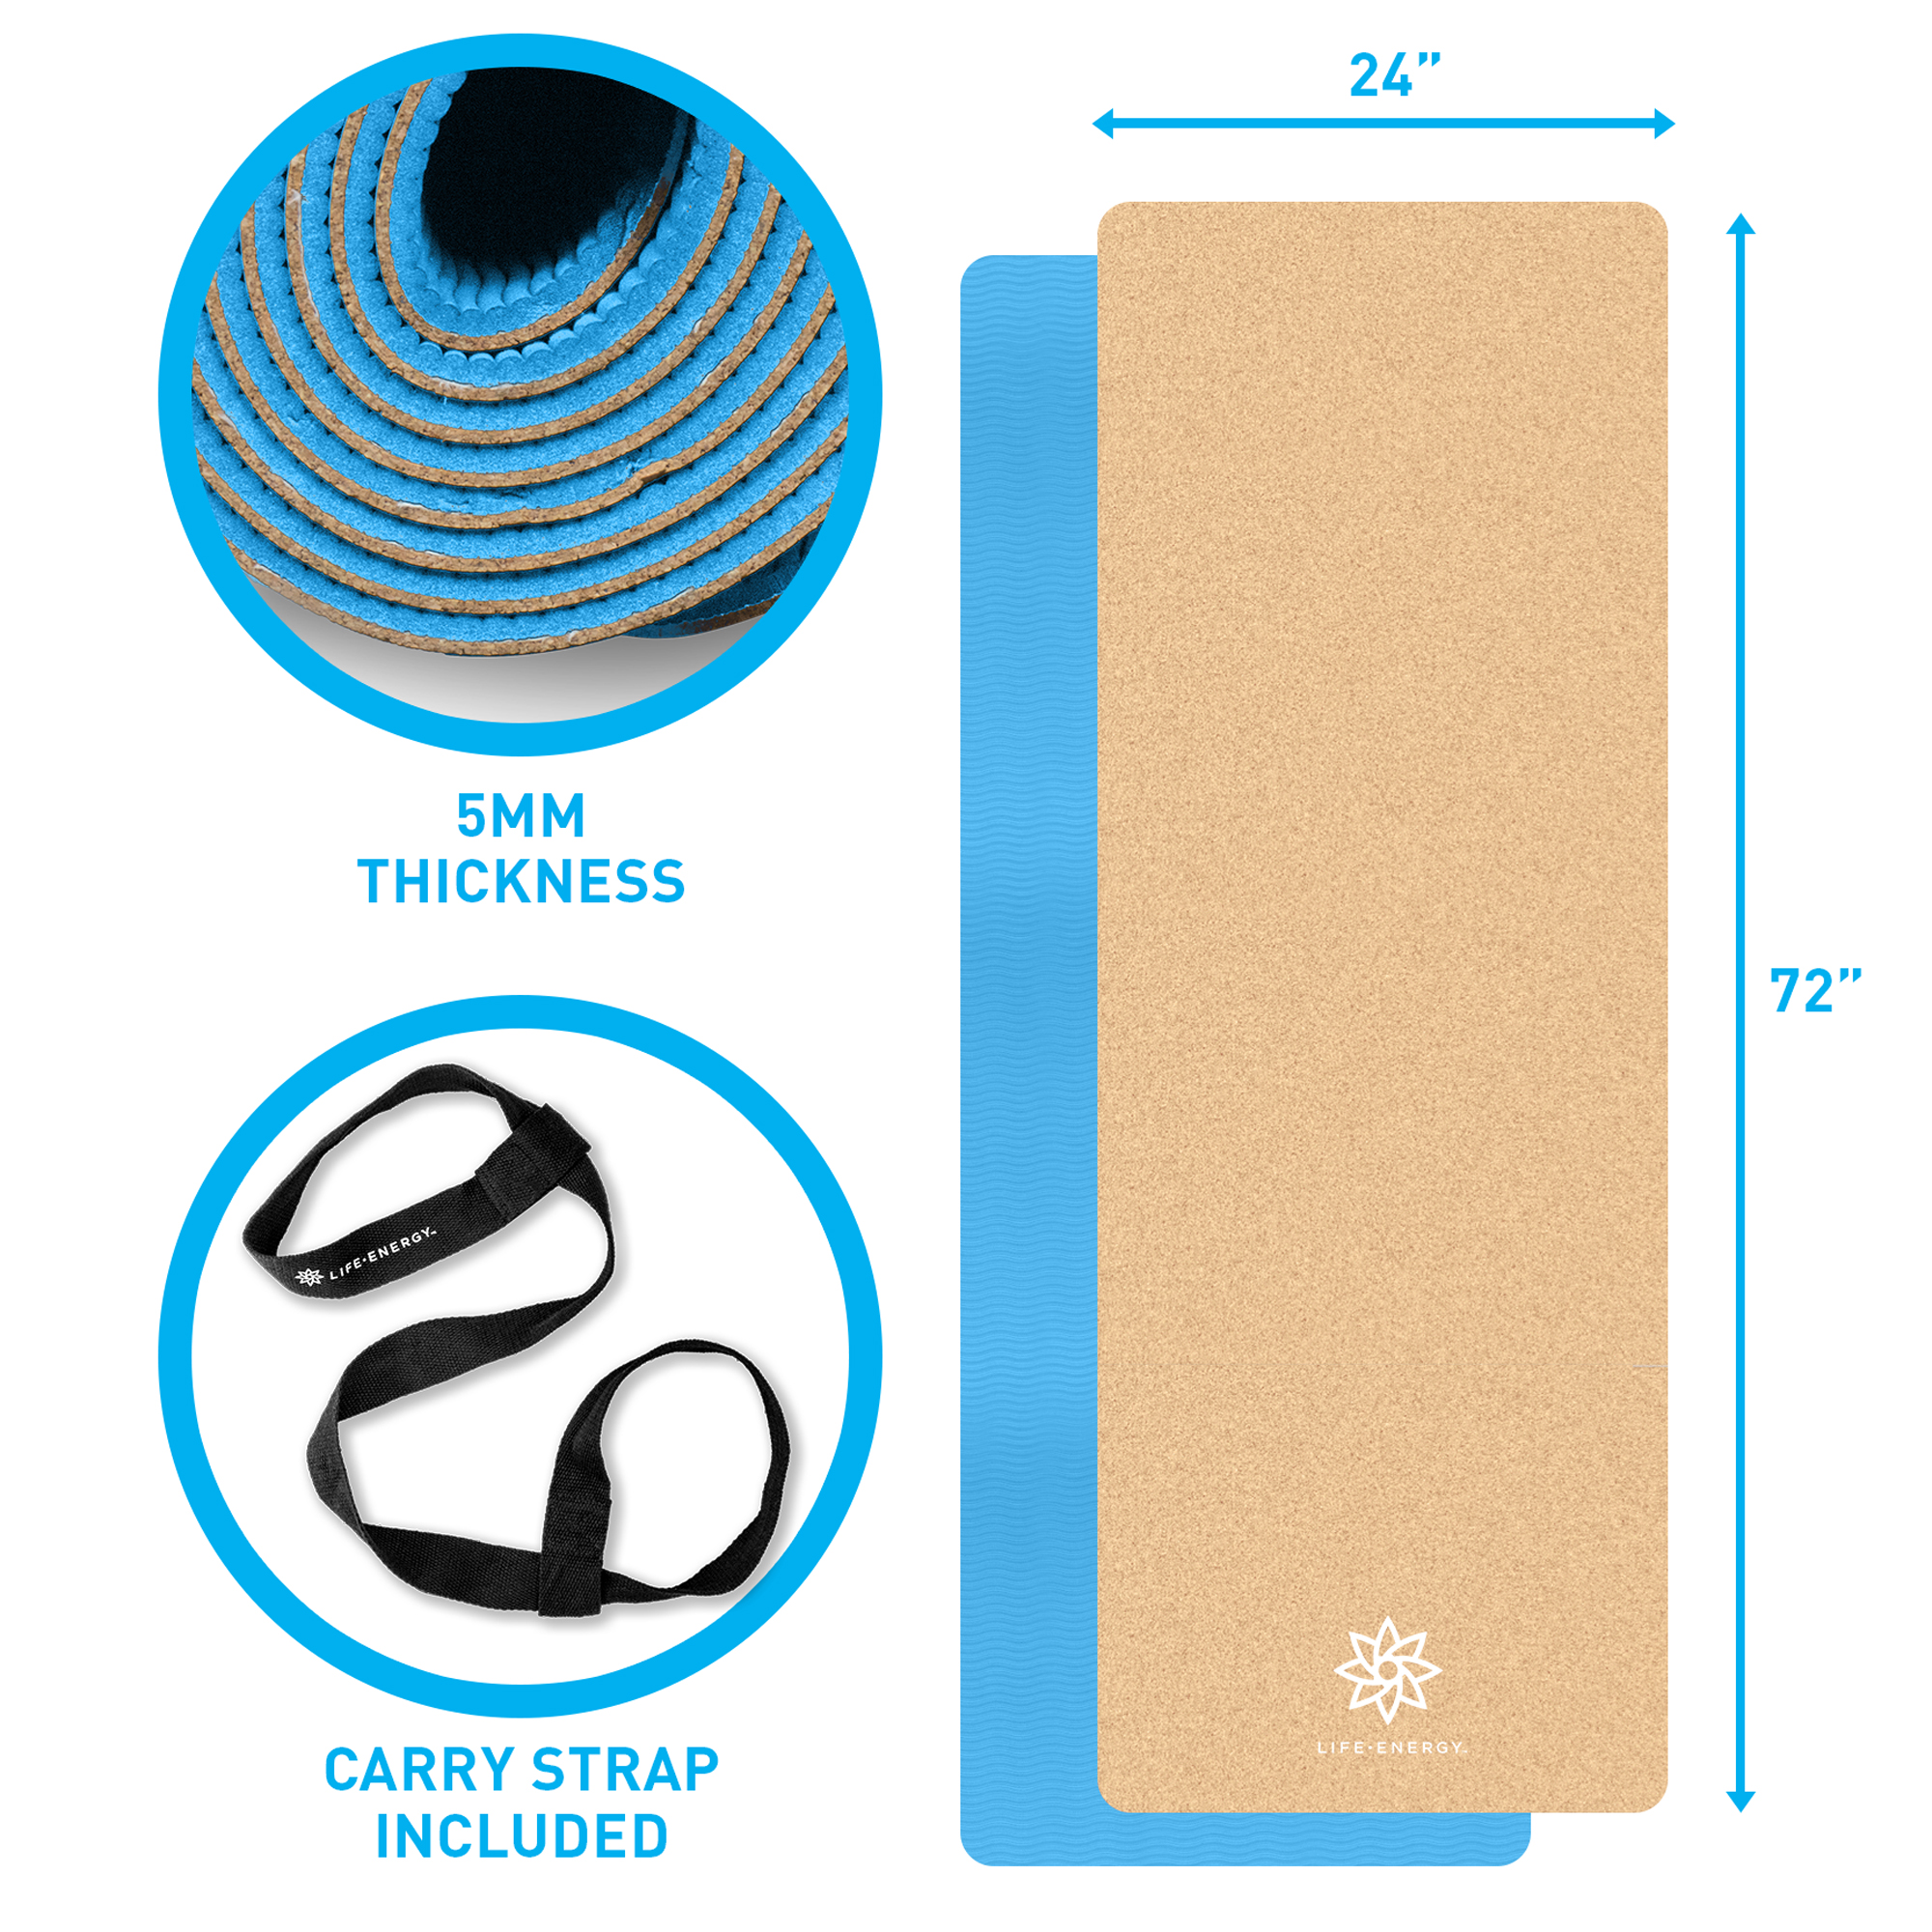 Life Energy 5mm Thick, EkoSmart Non-Slip Cork Yoga Mat with Carry Strap - image 3 of 7